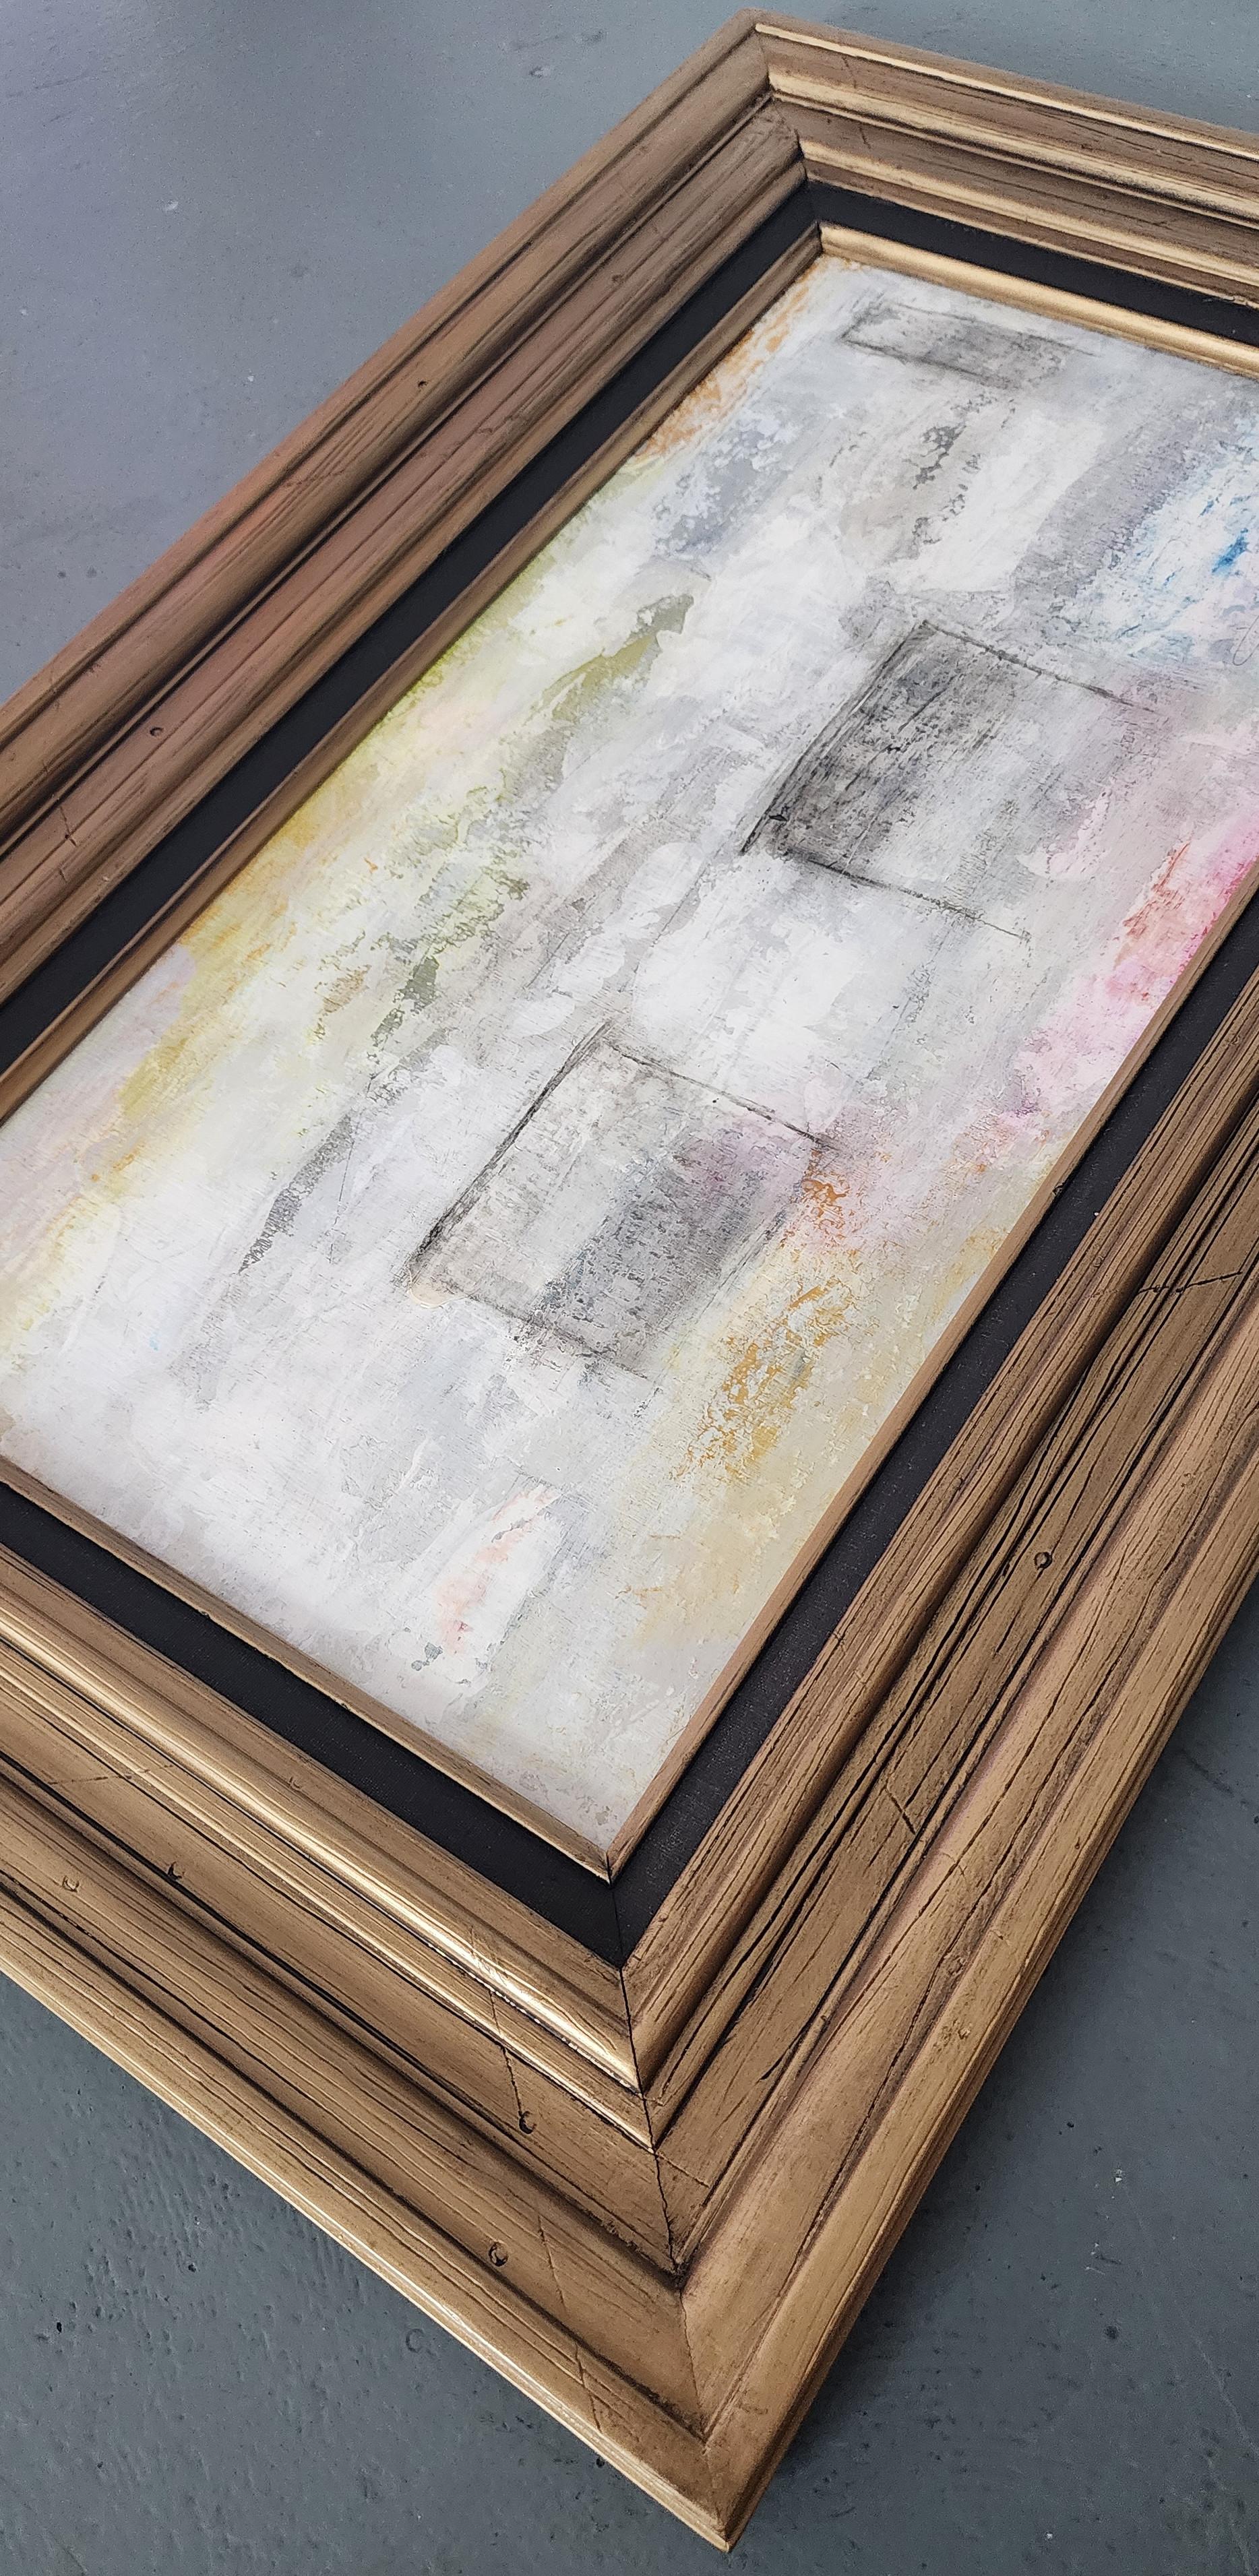 Kelley Carman
Almost Touching (Gestural Abstract, Whitewash, Pastel, Yellow, Pink, Gray)
Acrylic on Birch Panel 
Year: 2024
Size: 11.5 x 23.5 inches
Framed Size: 19 x 31 inches
Signed and titled
COA provided 

*Framed in a wood frame - ready to